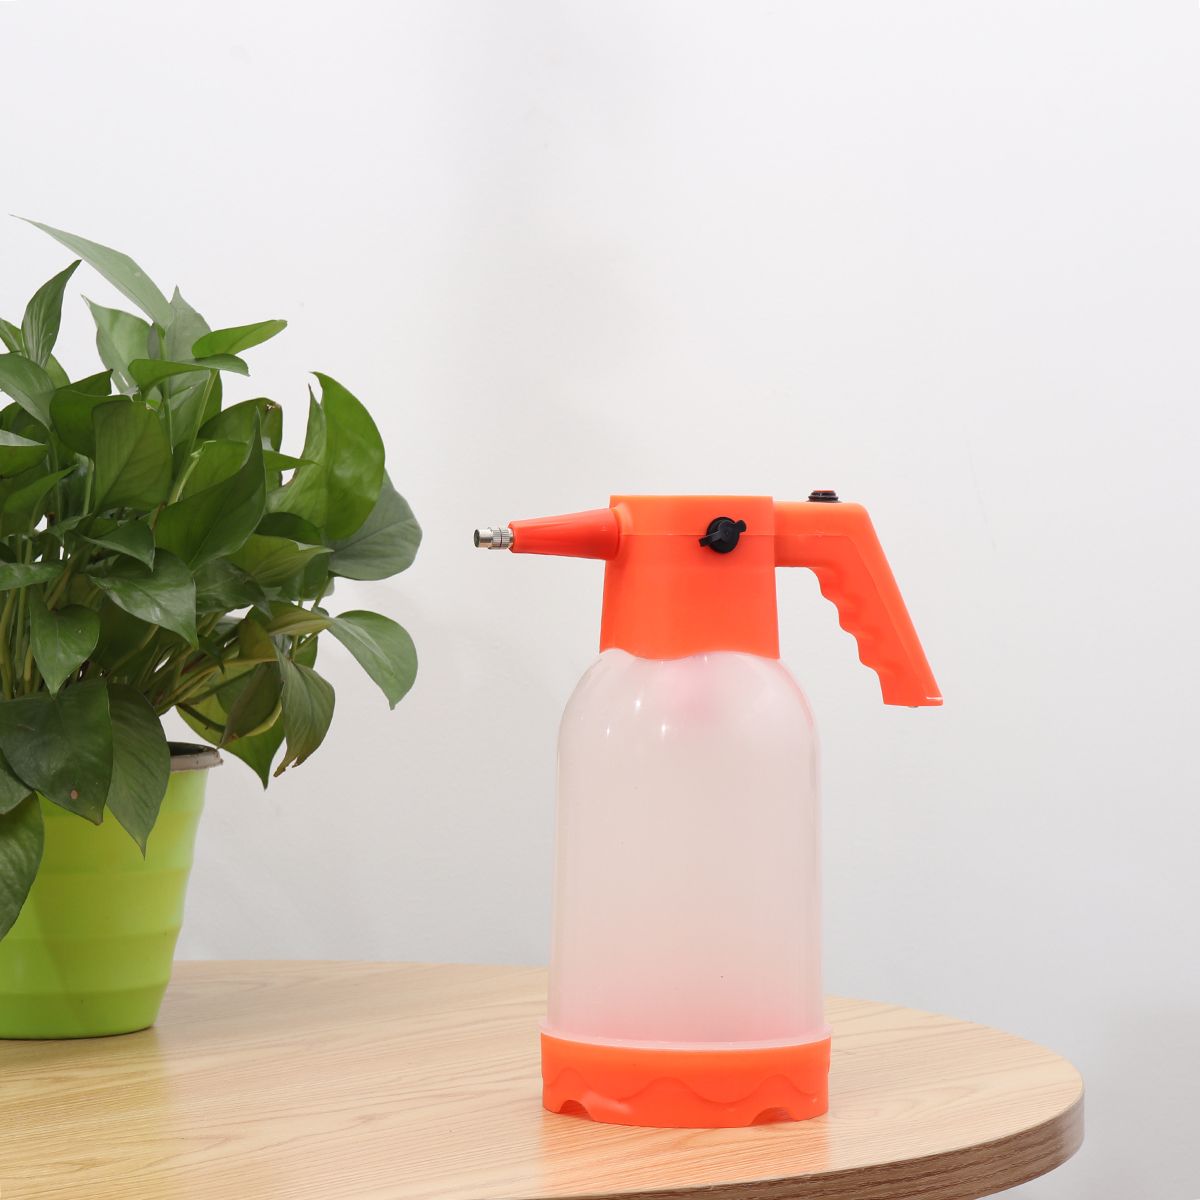 2L-Electric-Portable-Chemical-Sprayer-Garden-Spray-Bottle-Plant-Flowers-Watering-1741189